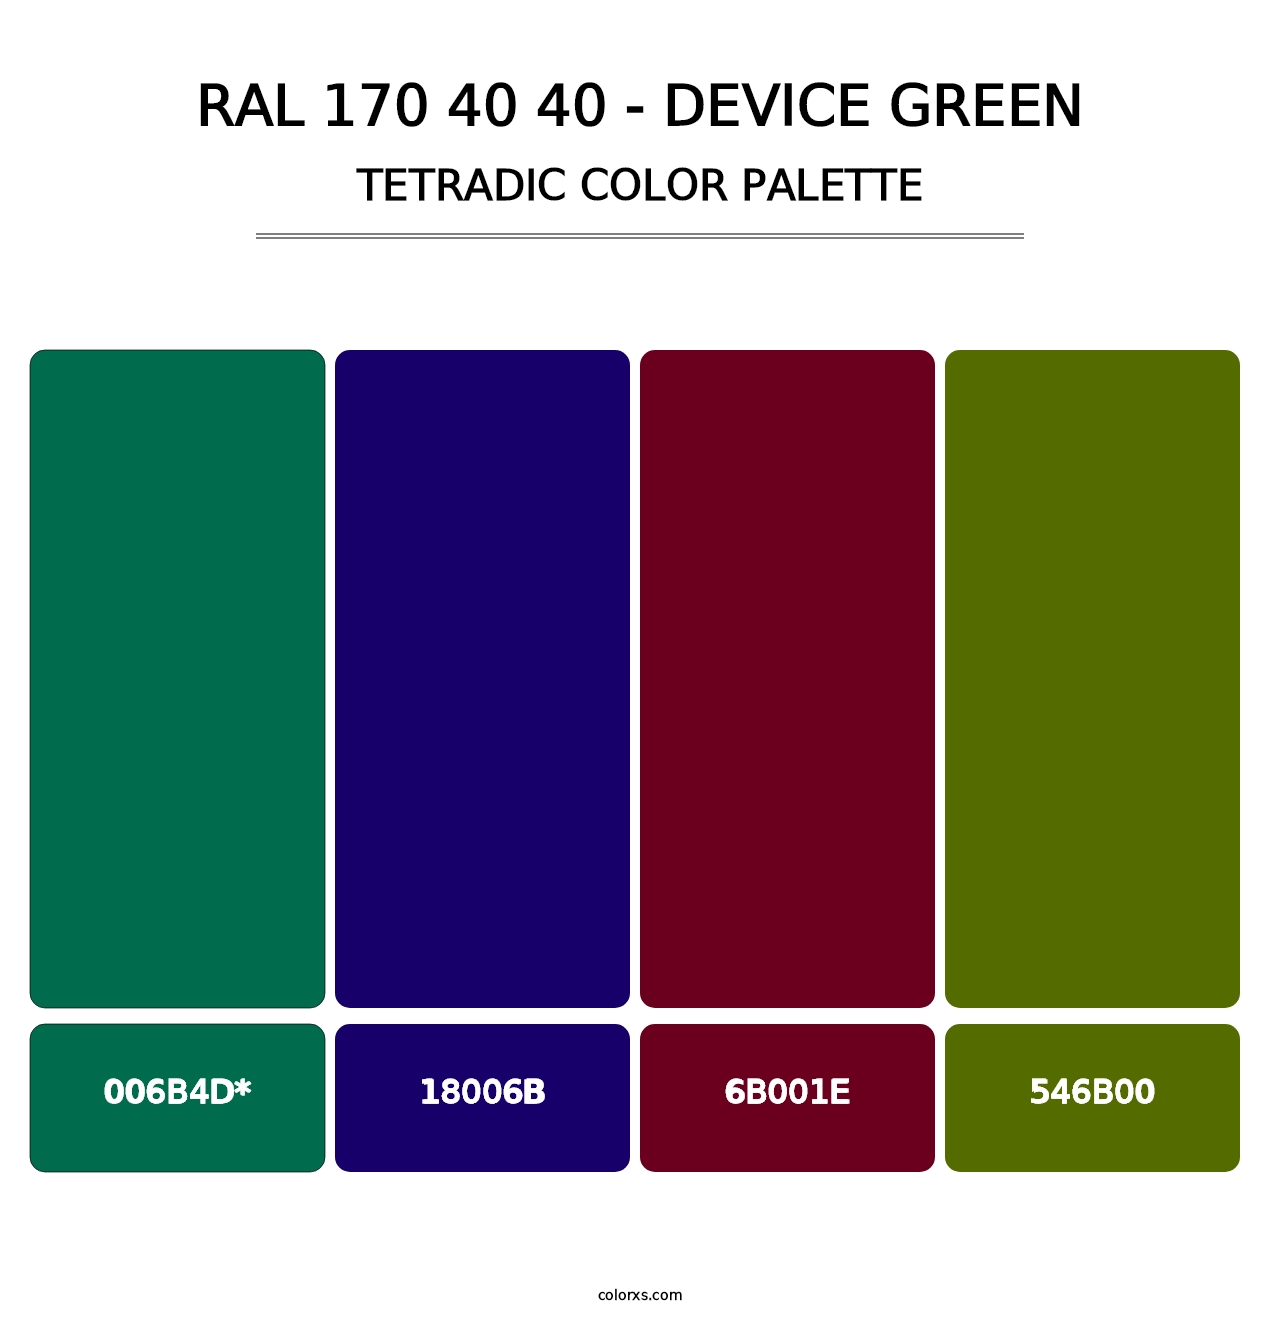 RAL 170 40 40 - Device Green - Tetradic Color Palette